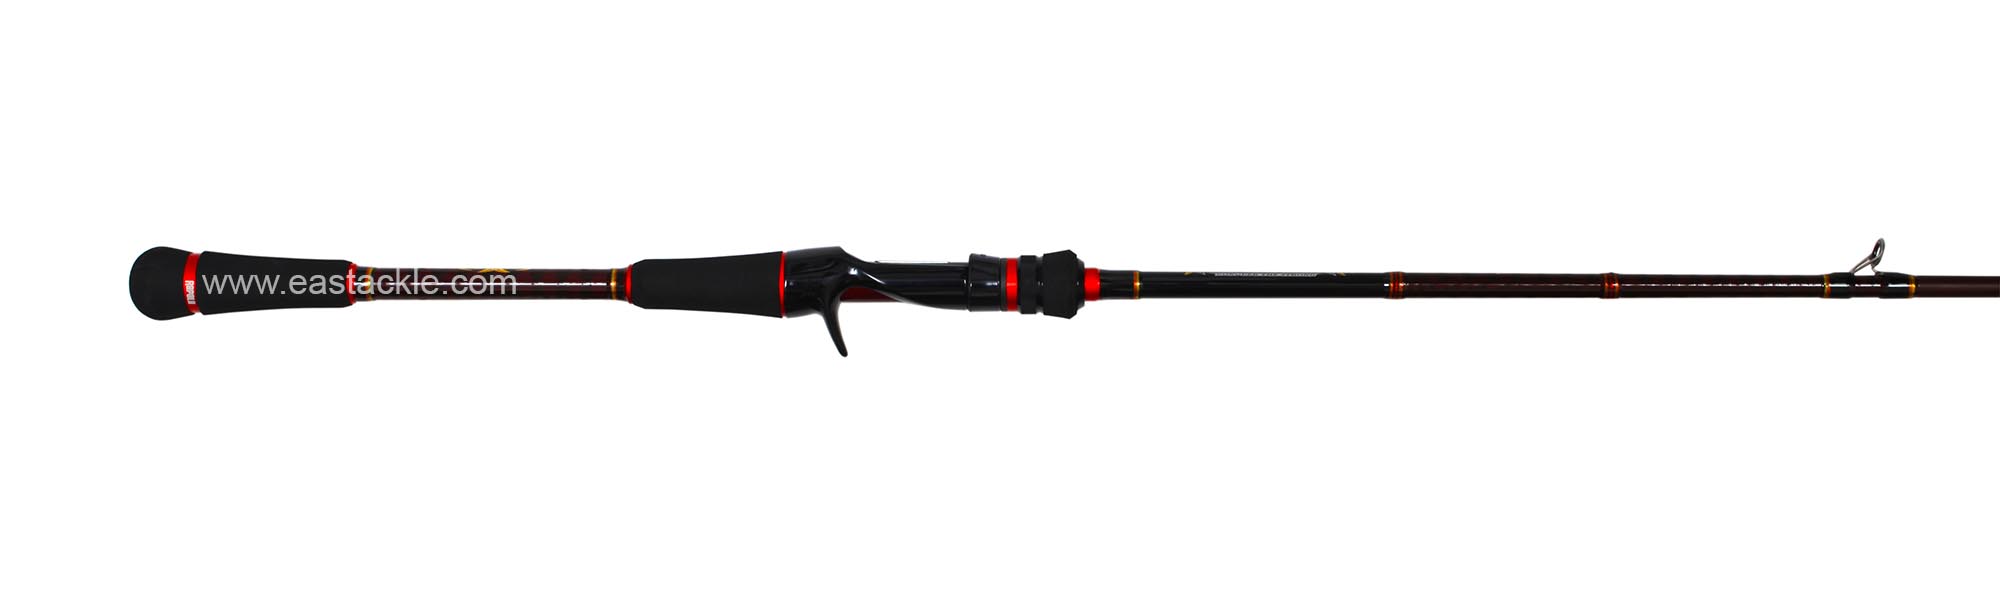 Rapala - 2018 Rapalero - RRC662XH - Bait Casting Rod - Butt to Stripper Guide (Side View) | Eastackle